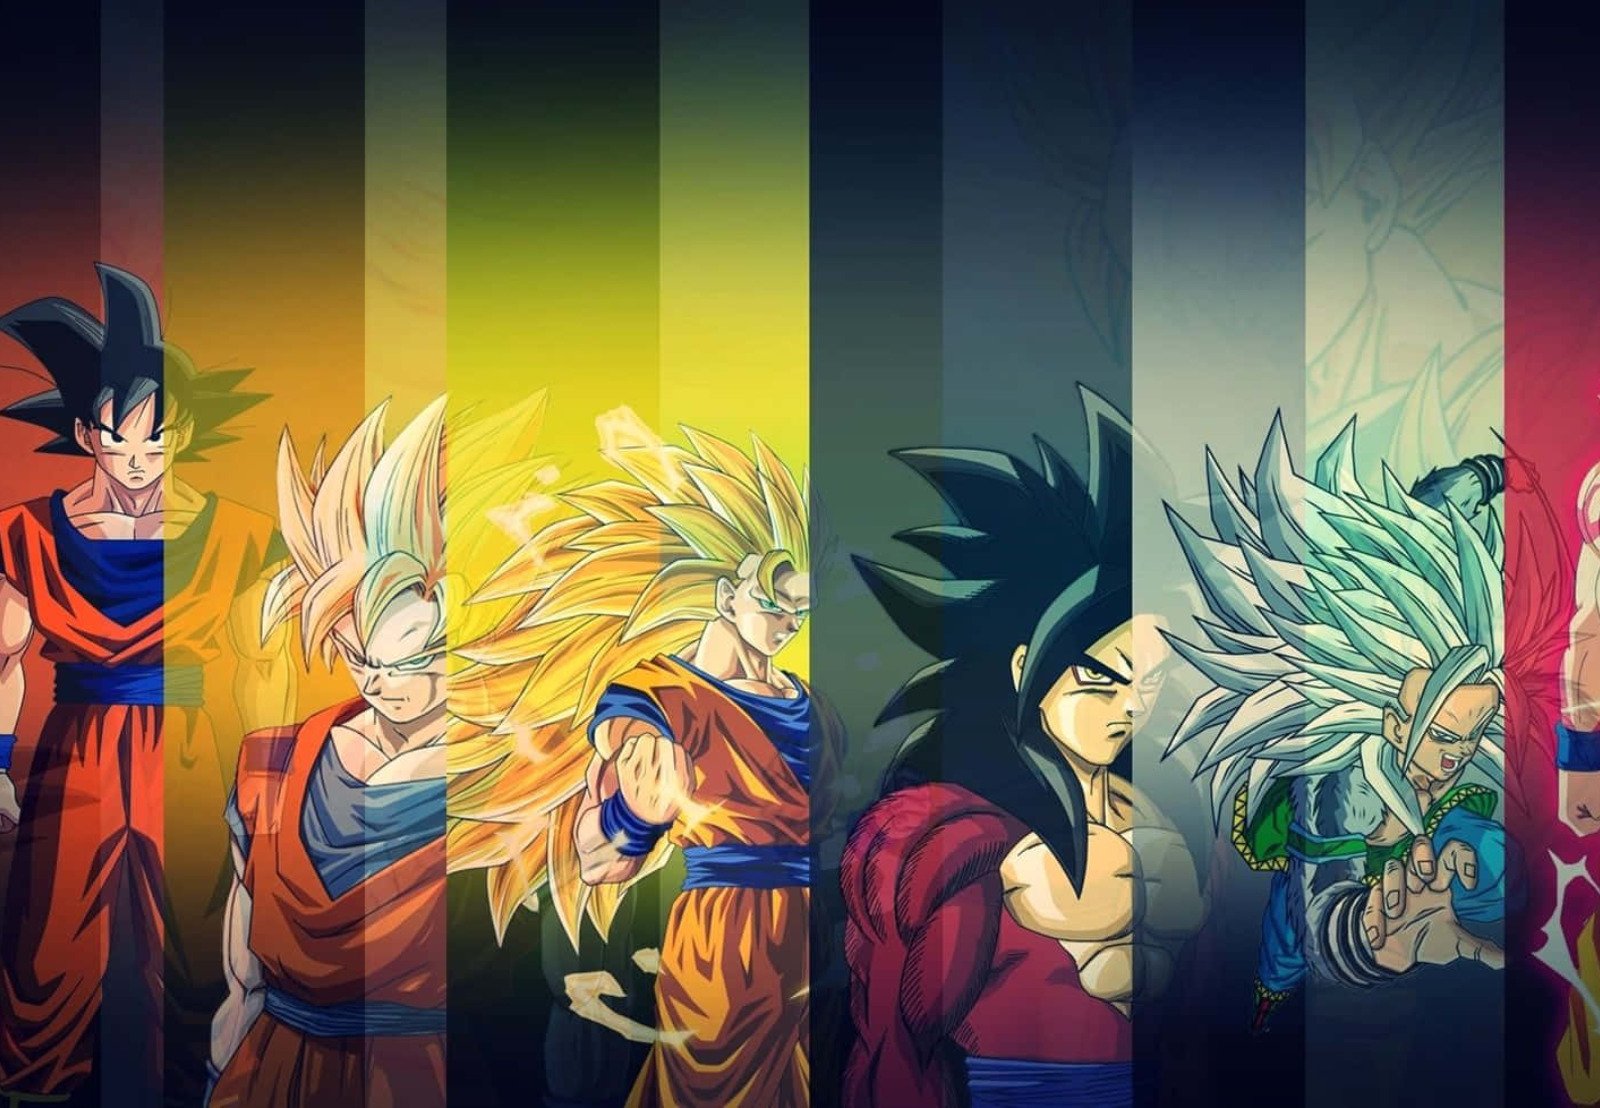 Read more about the article Dragon ball is Back! Learn 6 life lessons from Goku.